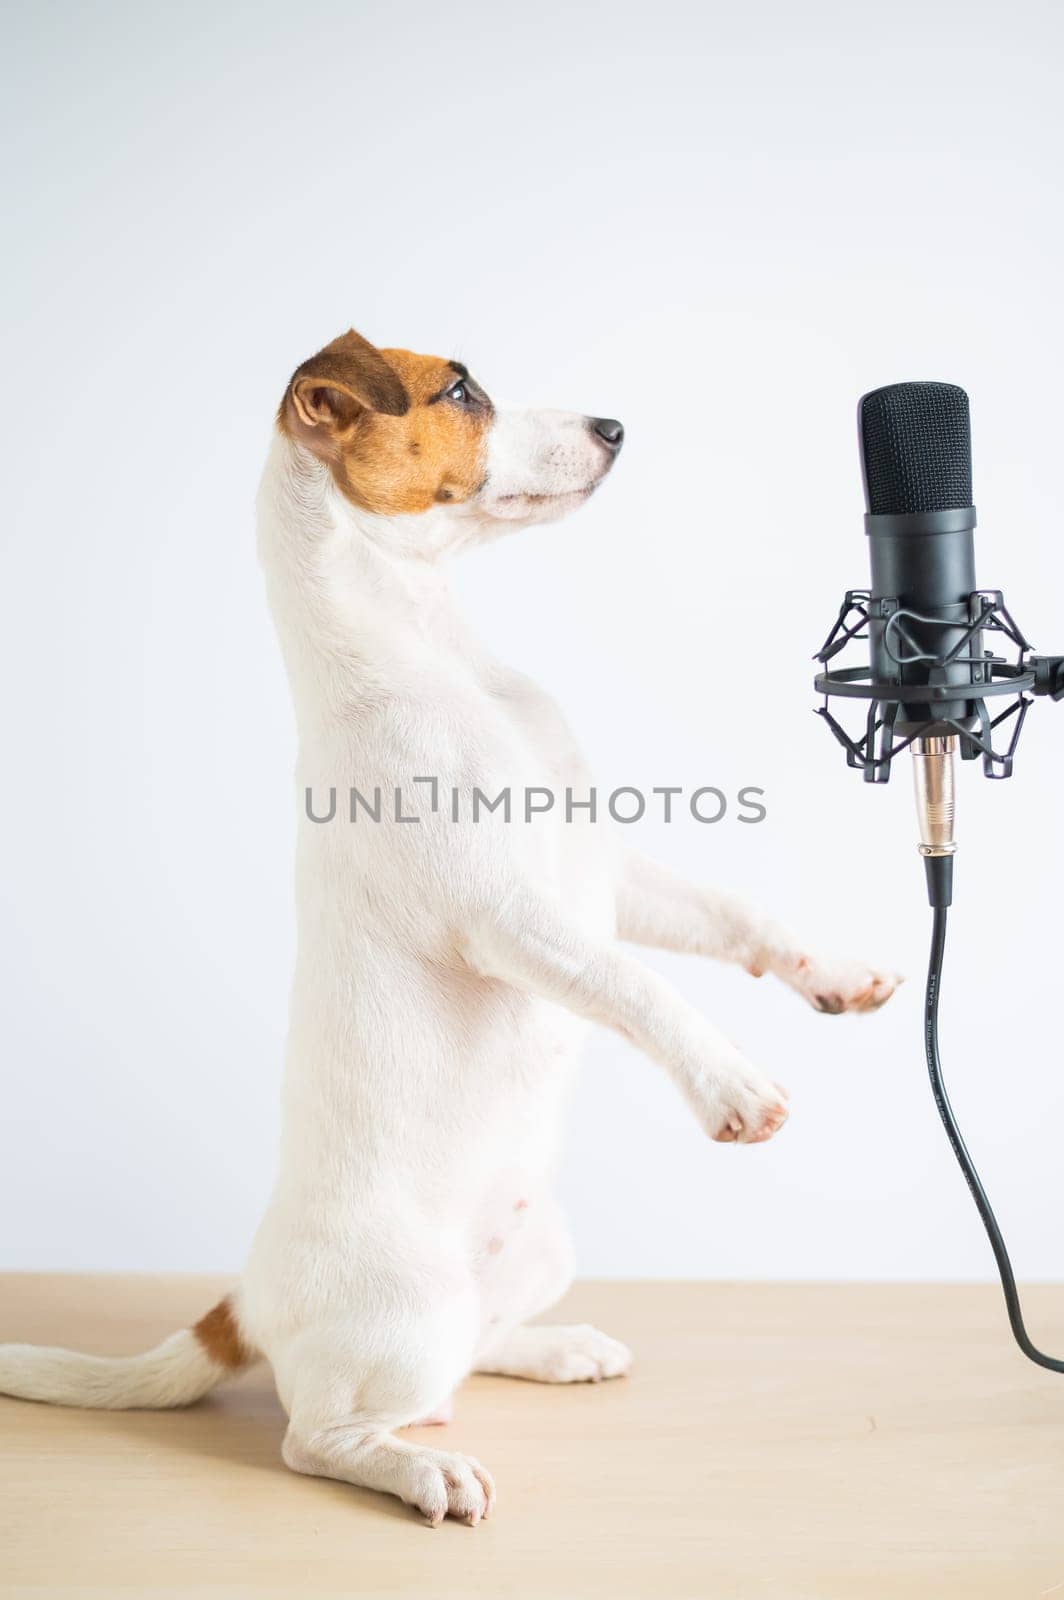 Jack russell terrier dog stands on its hind legs in a pose to serve at the microphone and is broadcasting on a white background by mrwed54